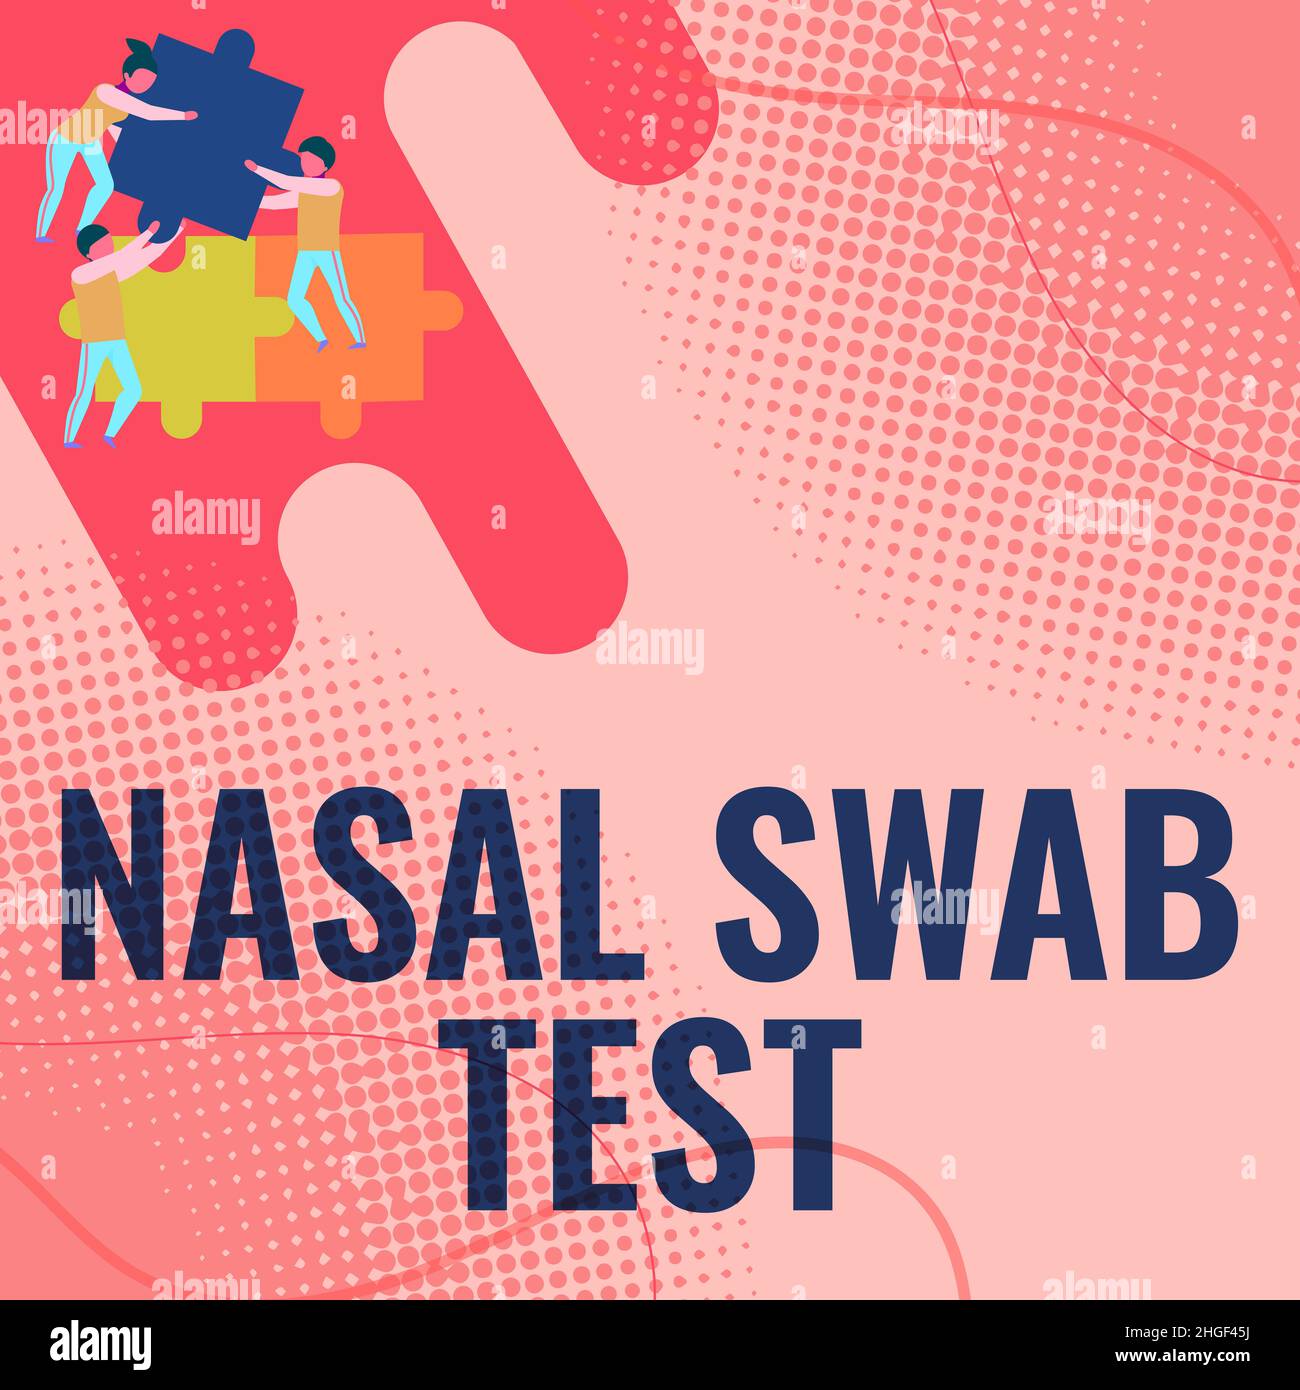 Text showing inspiration Nasal Swab Test, Word for diagnosing an upper respiratory tract infection through nasal secretion Team Holding Jigsaw Pieces Stock Photo